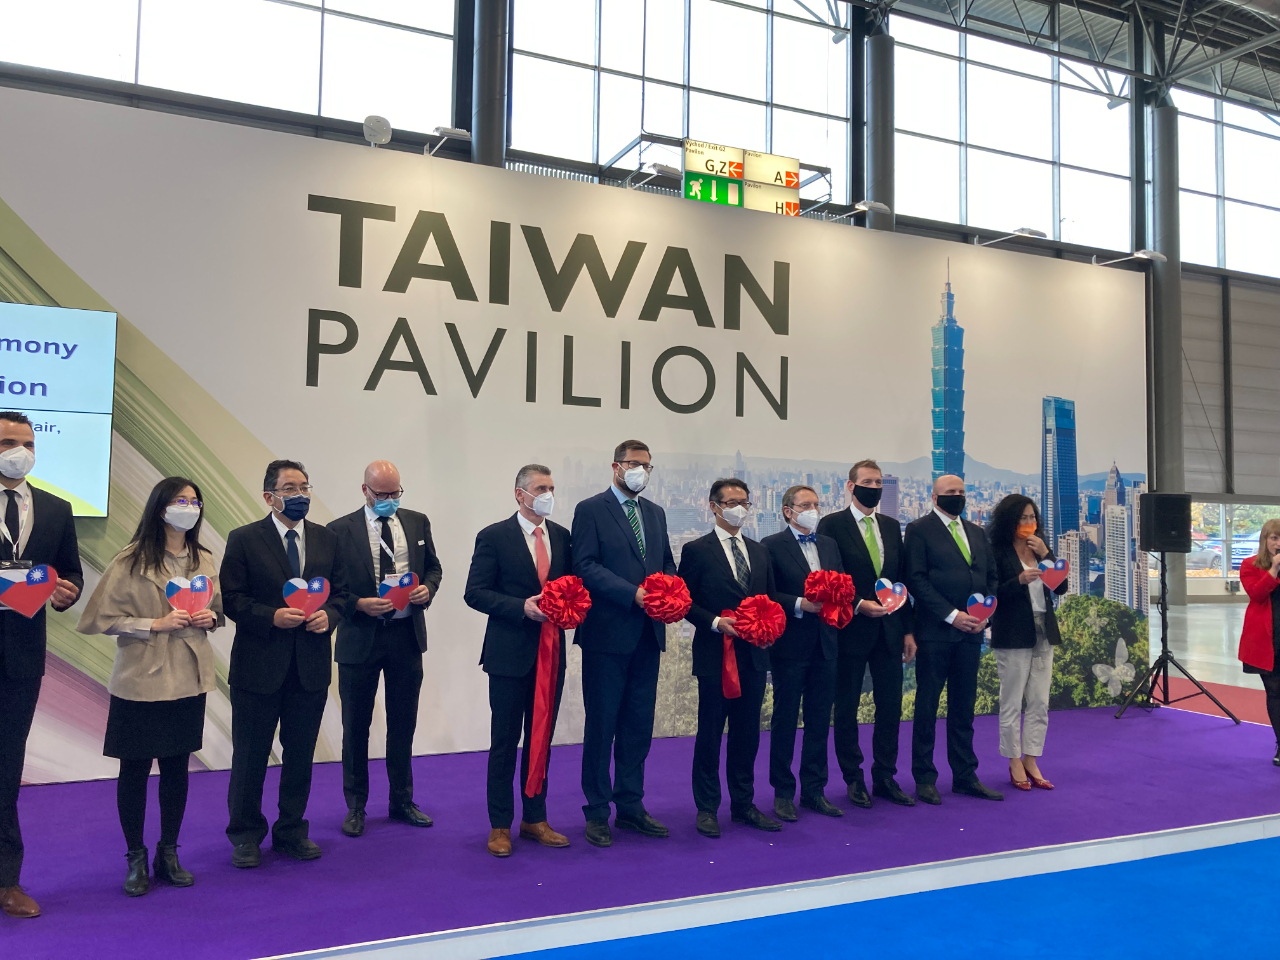 Opening ceremony of Taiwan Pavilion at 2021 International Engineering Fair (MSV) at Brno   